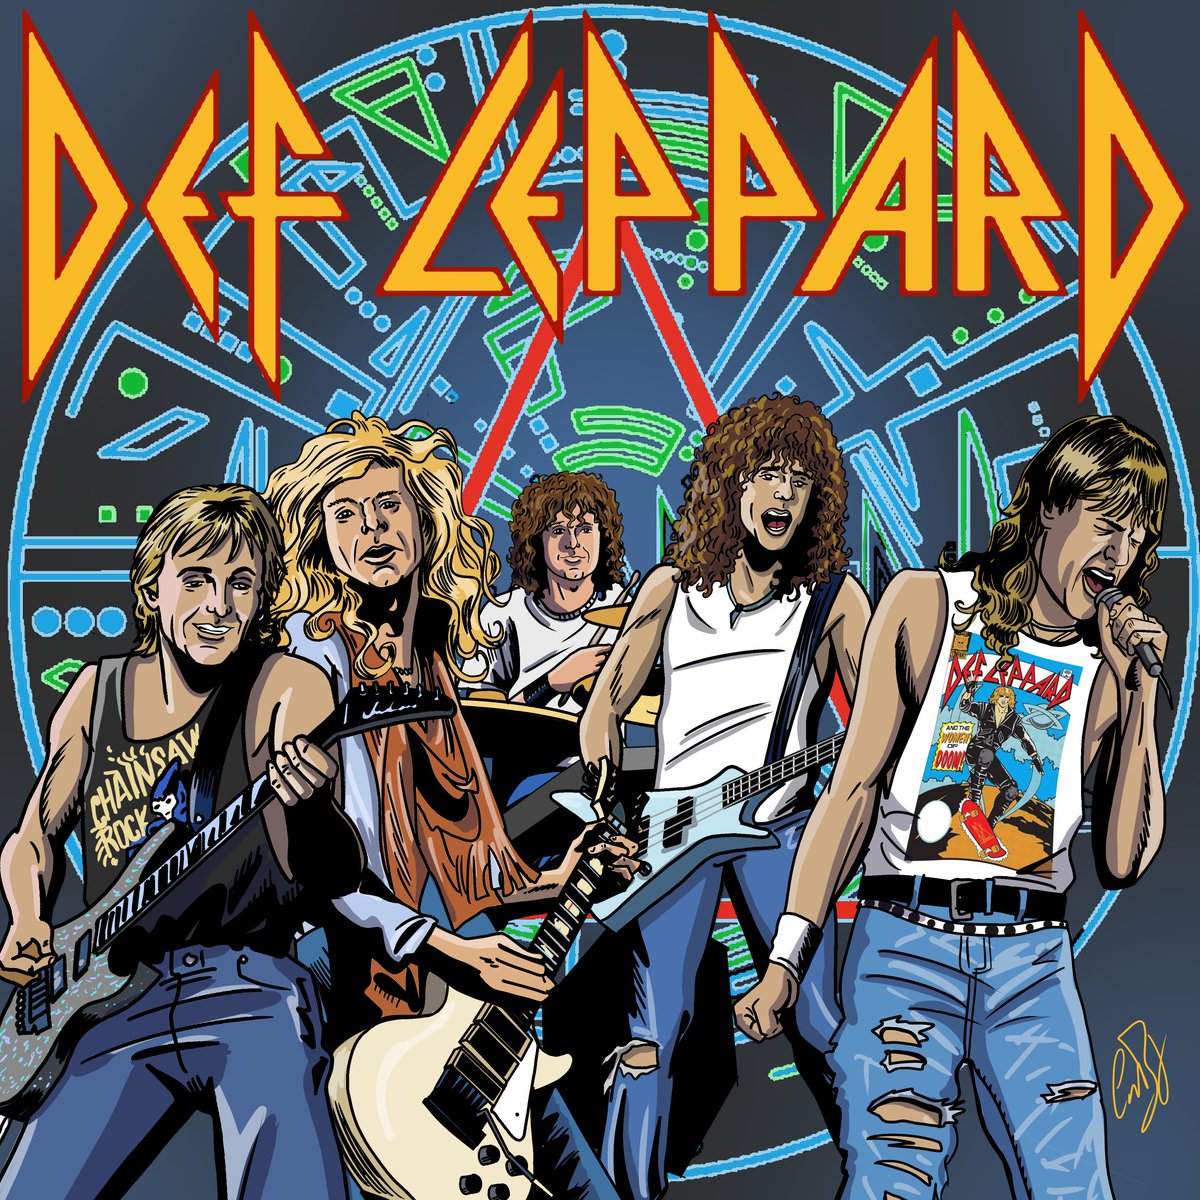 Def Leppard! What can I say? They hooked me when I was young and I still love them today! They were my first concert back in 1992! @DefLeppard @ZeffJoeelliott @RickSavage0 @philcollen0 @rickallenlive #defleppard #steveclark #philcollen #joeelliott